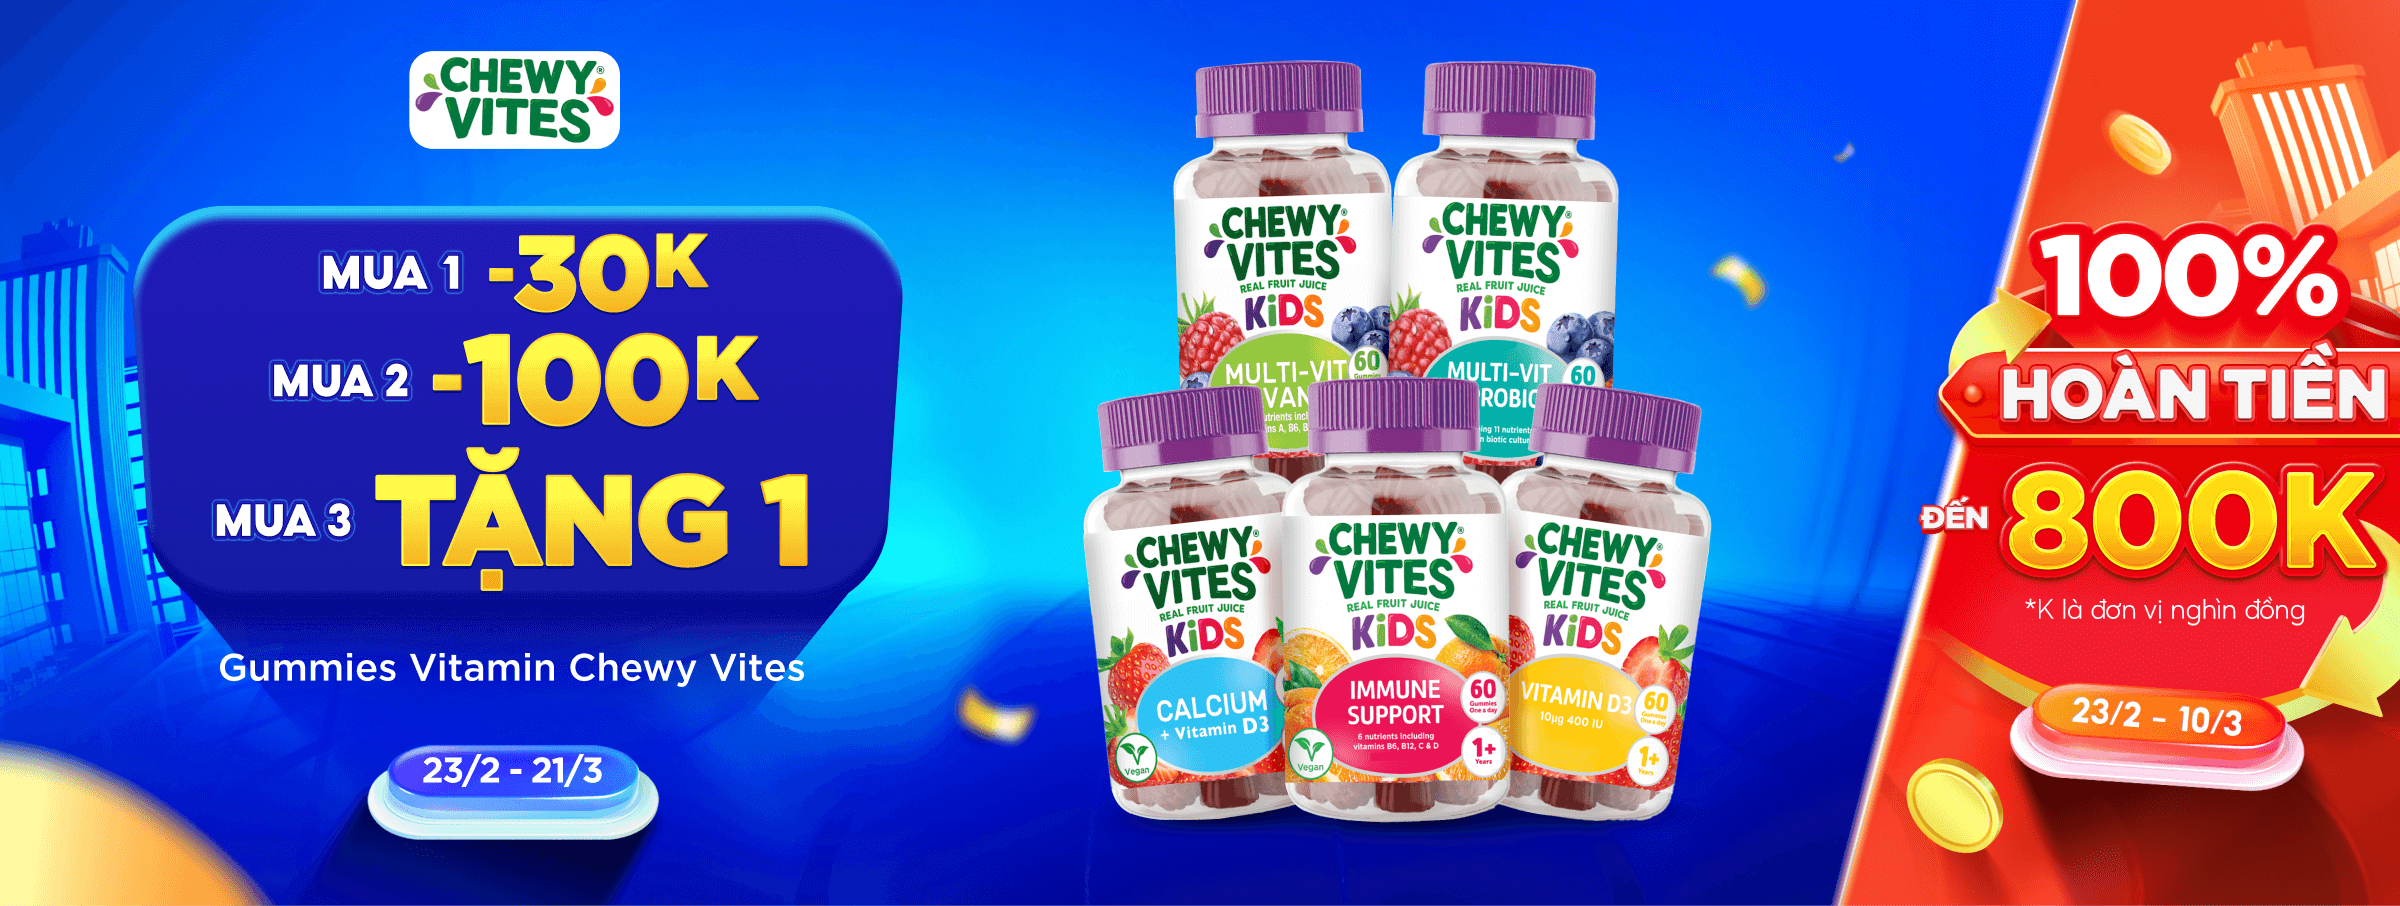 Chewy Vites  - CATE VITAMIN bé - T03